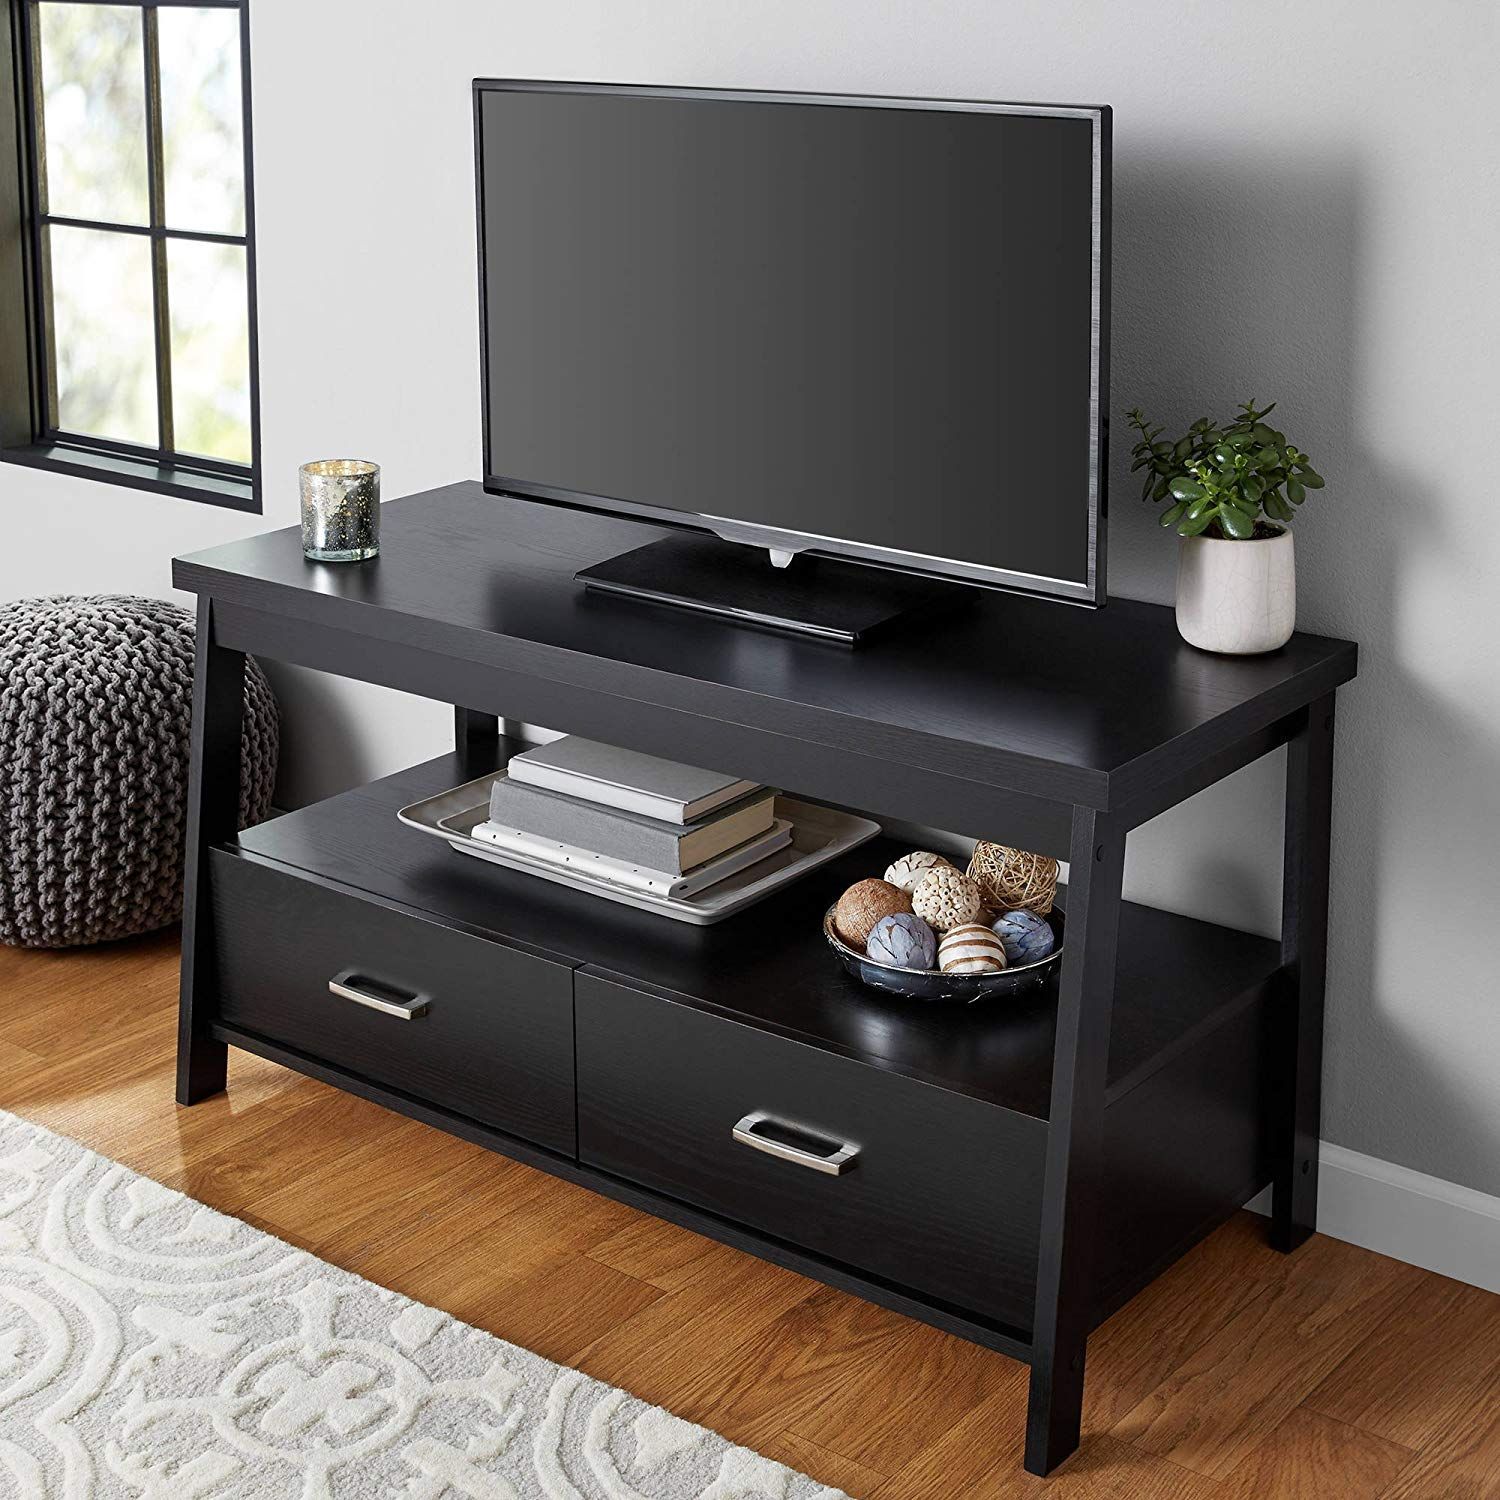 Mainstays Logan Tv Stand For Flat Screen Tvs Up To 47 And Inside Oak Tv Cabinets For Flat Screens (Photo 9 of 12)